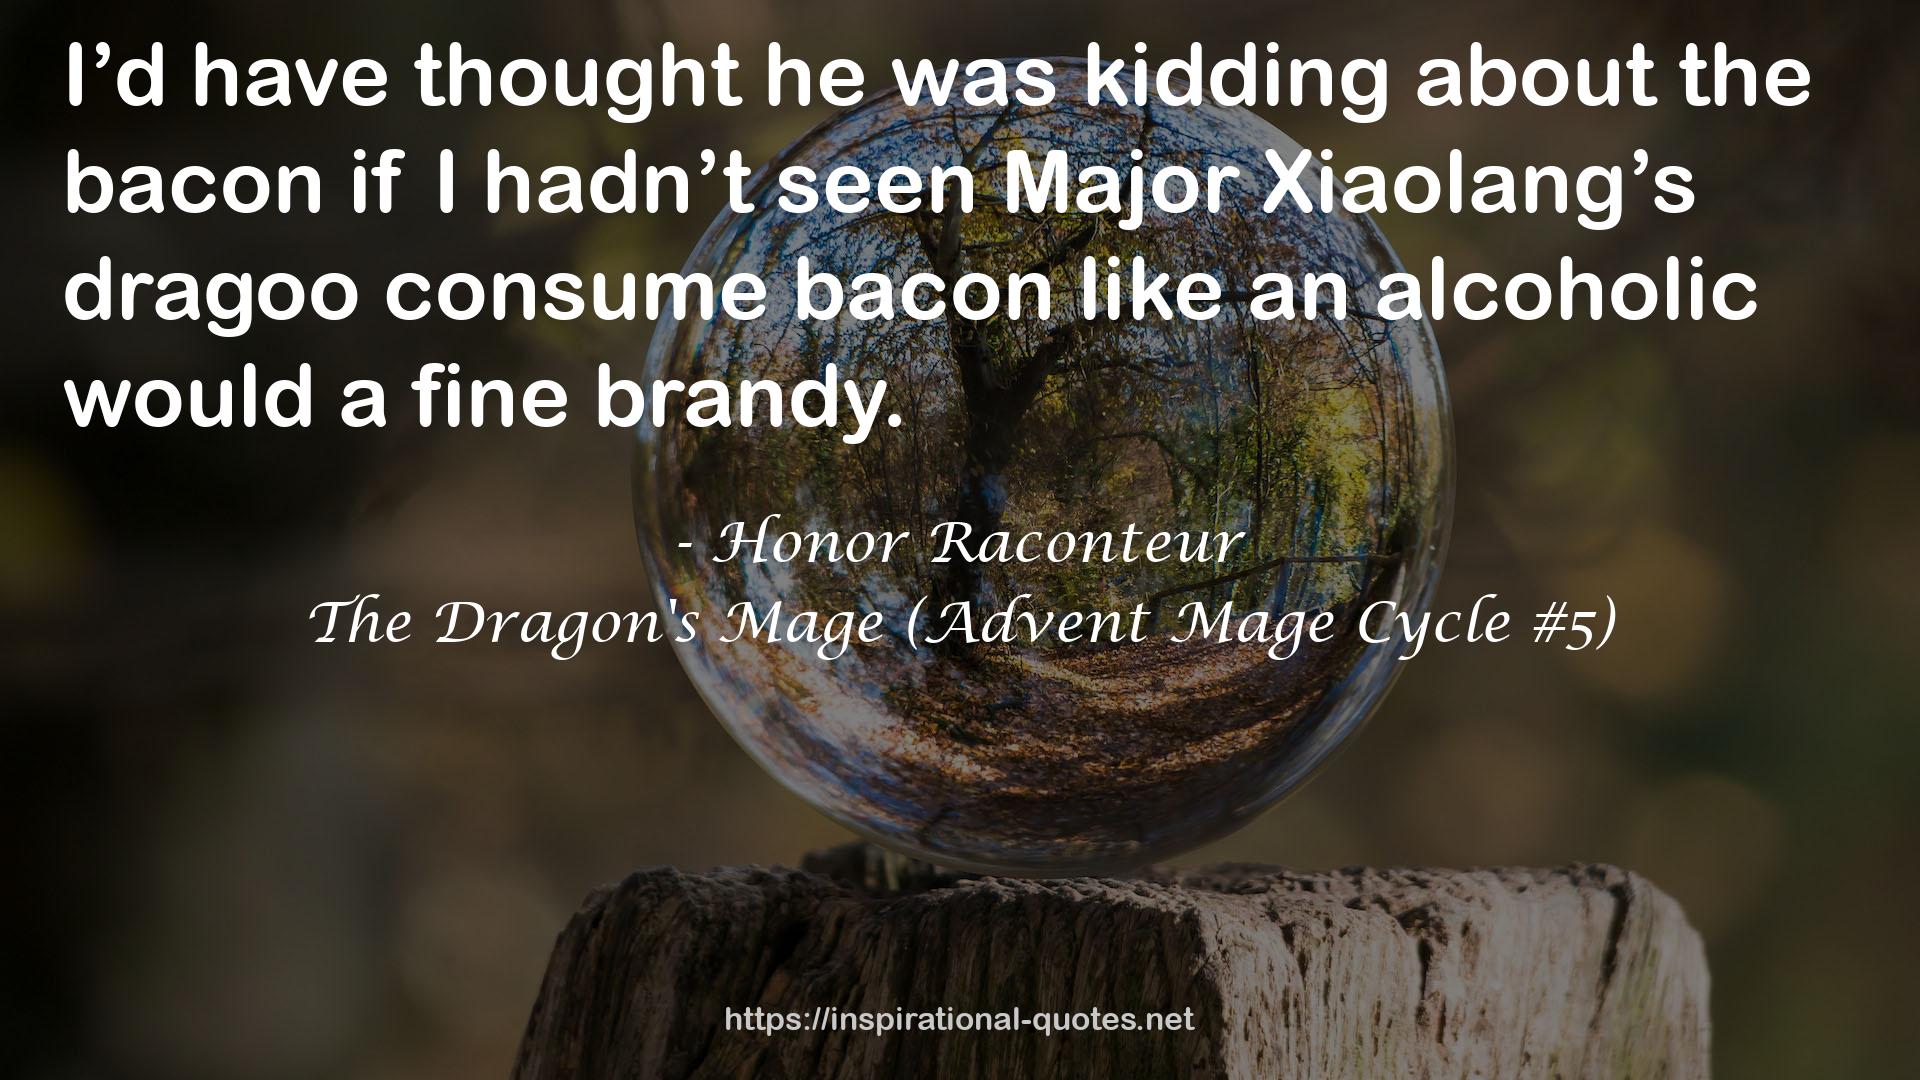 The Dragon's Mage (Advent Mage Cycle #5) QUOTES